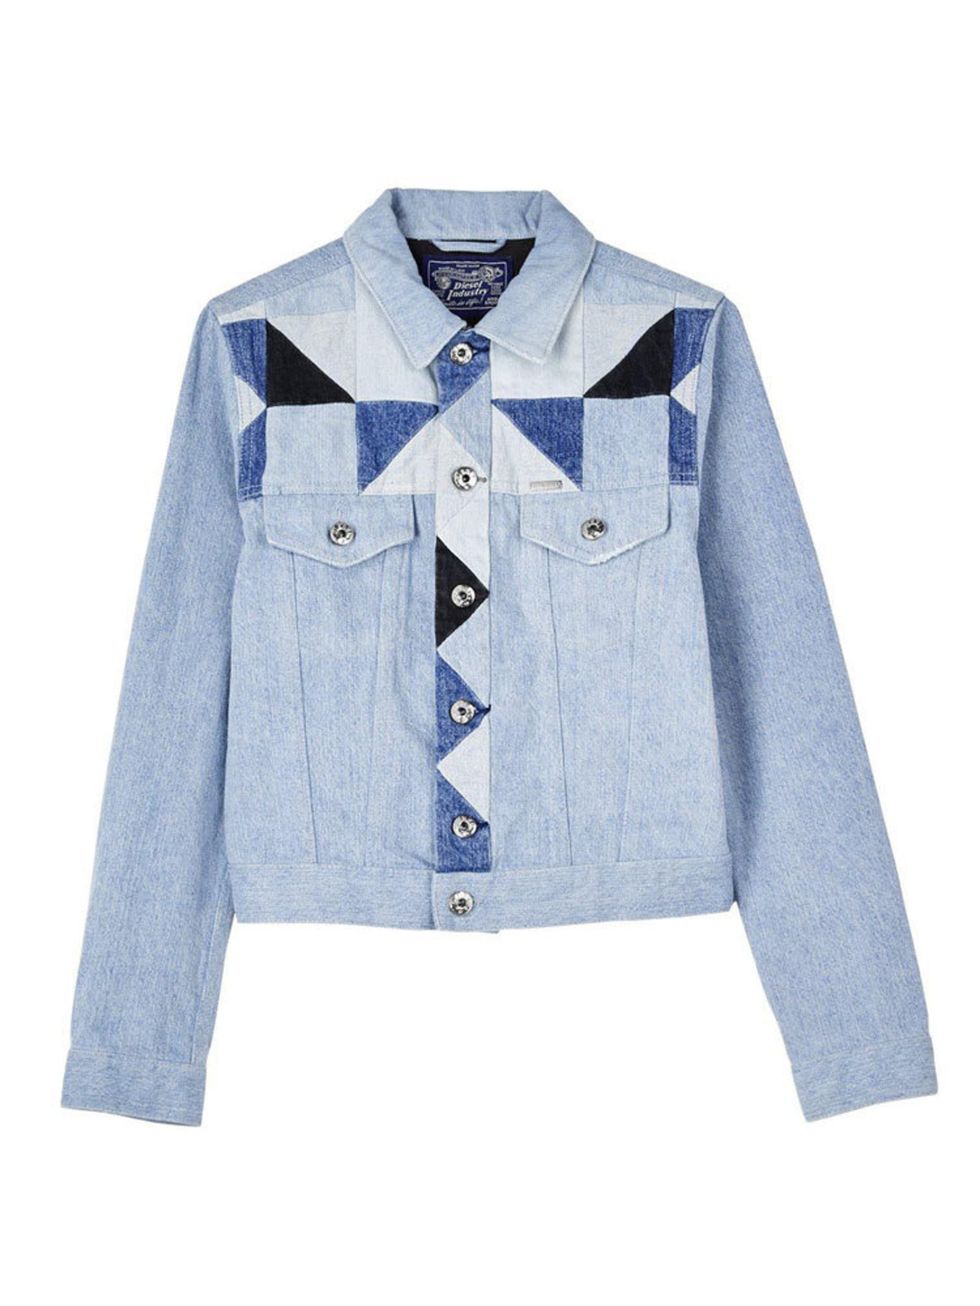 <p>Diesel Jacket, £270 at v<a href="http://www.veryexclusive.co.uk/diesel-roica-patchwork-denim-jacket-blue/1600054602.prd?_requestid=34145" target="_blank">eryexclusive.co.uk</a></p>

<p>Wear now: throw this over your leather jacket: double the jacket, d